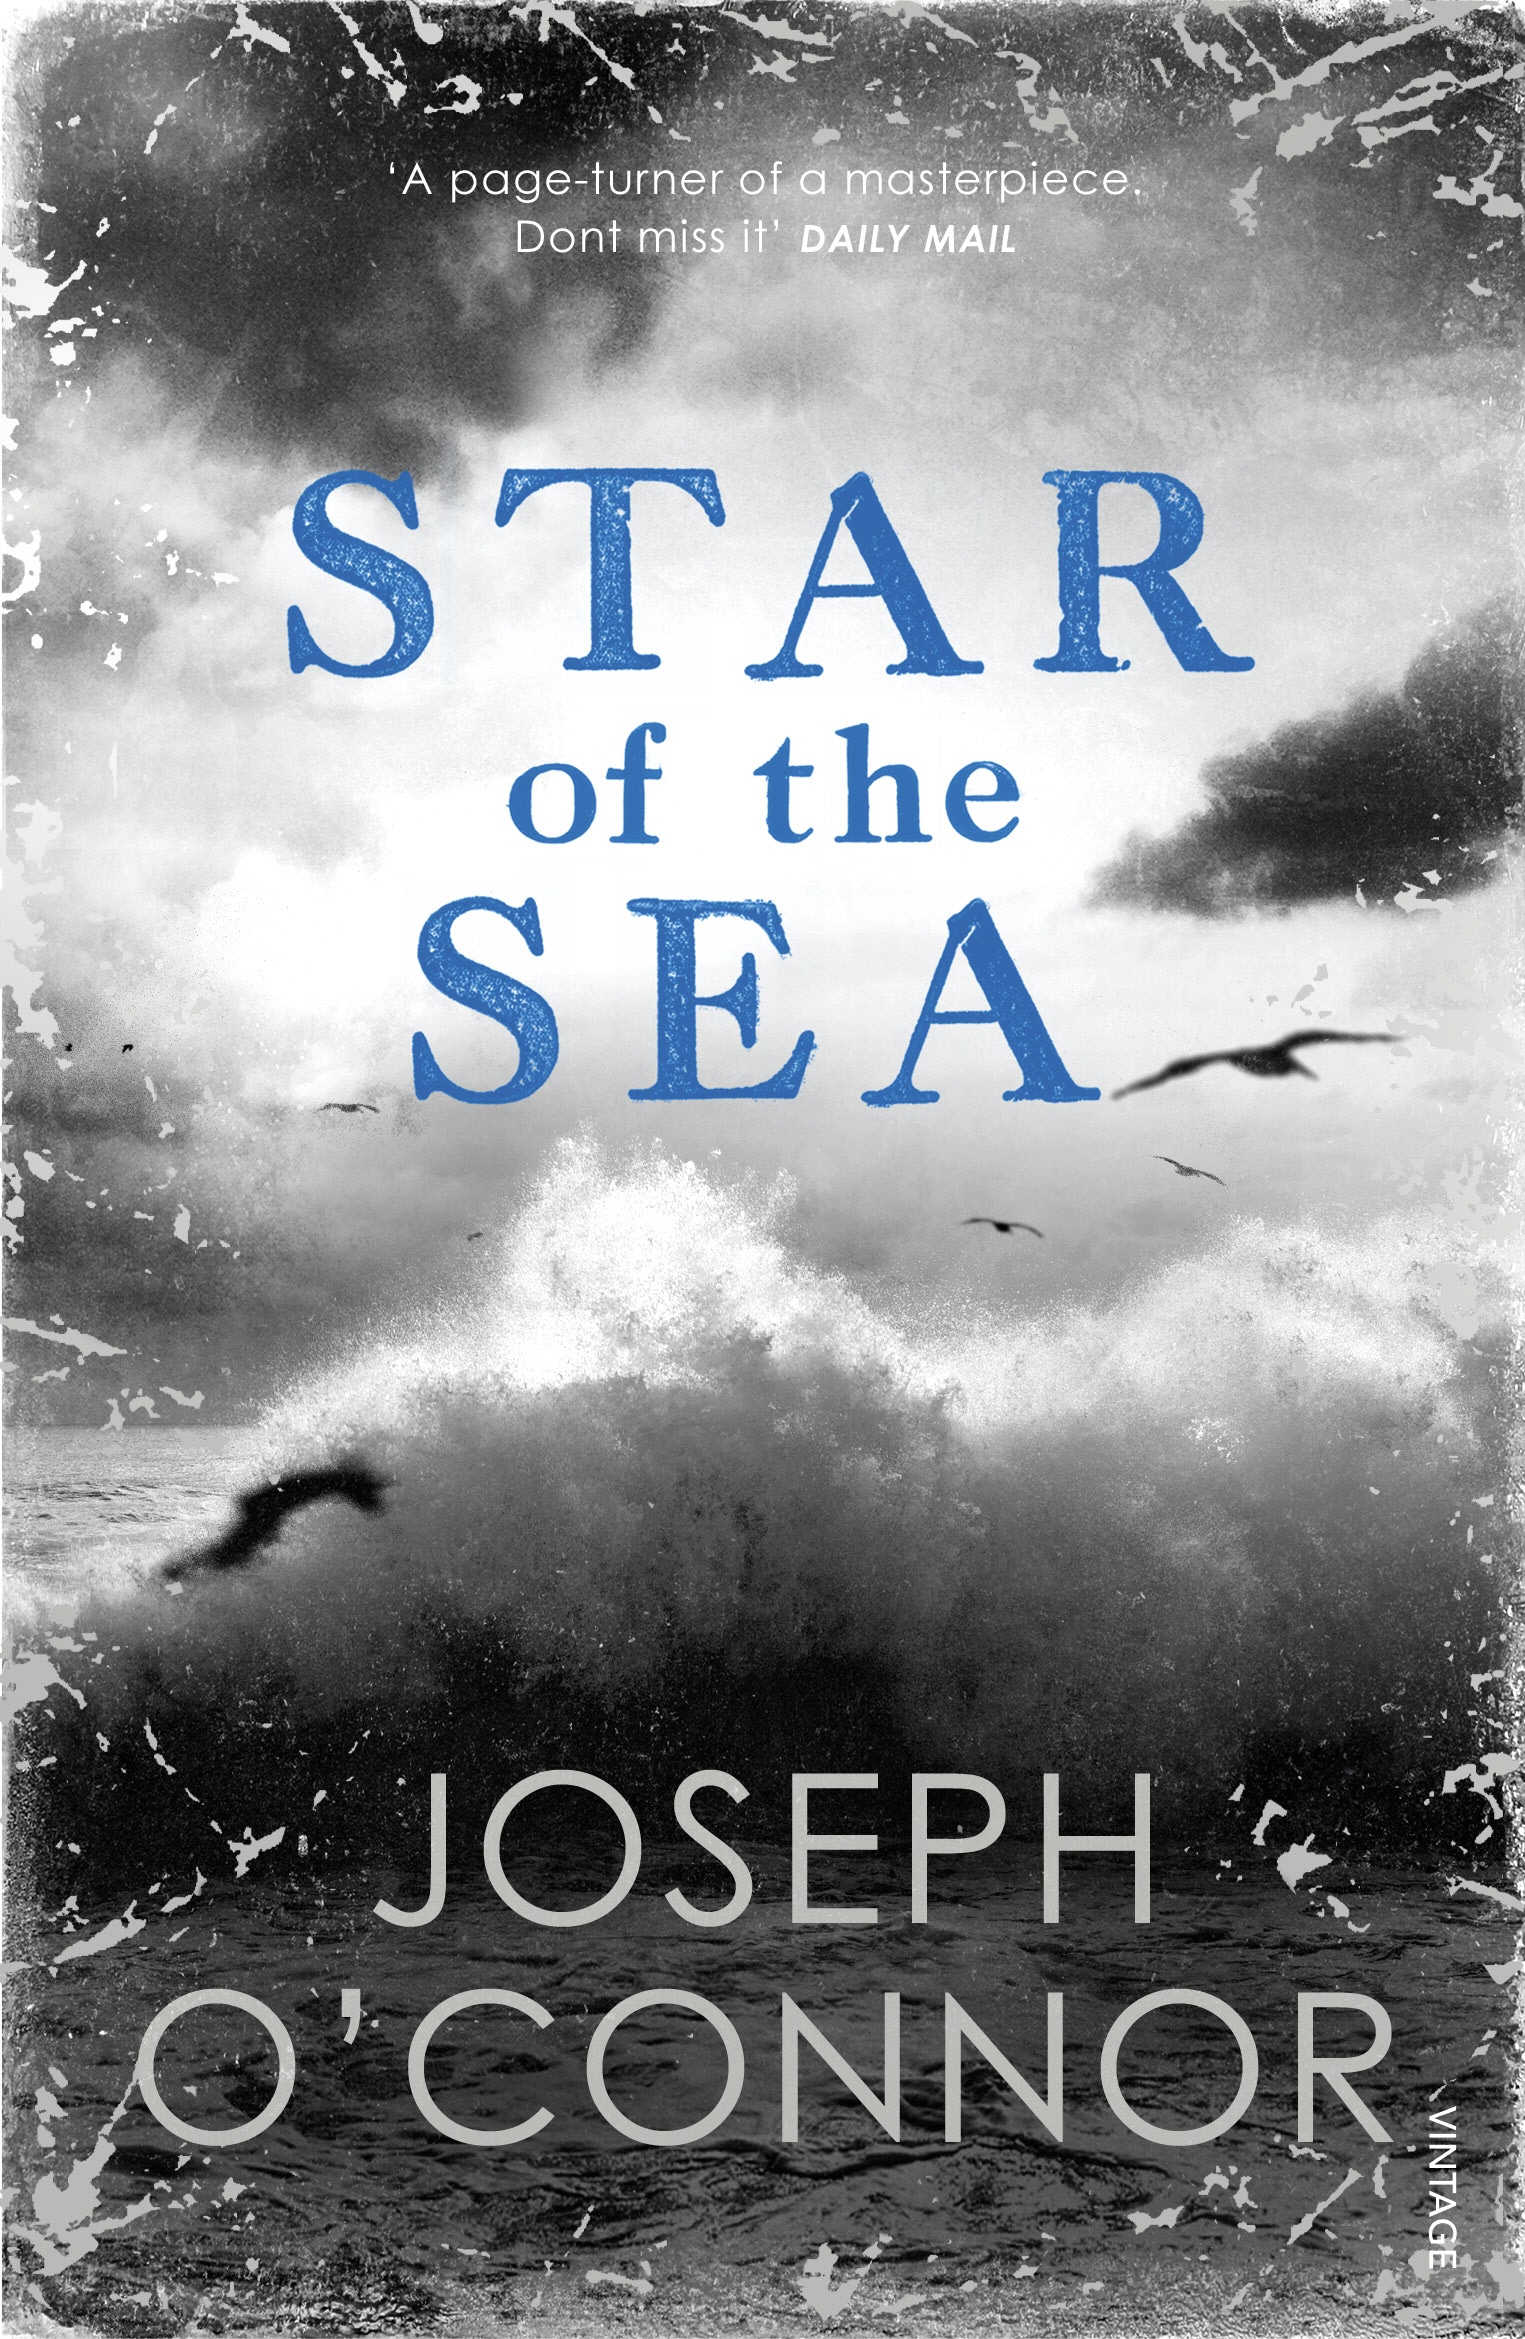 Book “Star of the Sea” by Joseph O'Connor — October 3, 2019